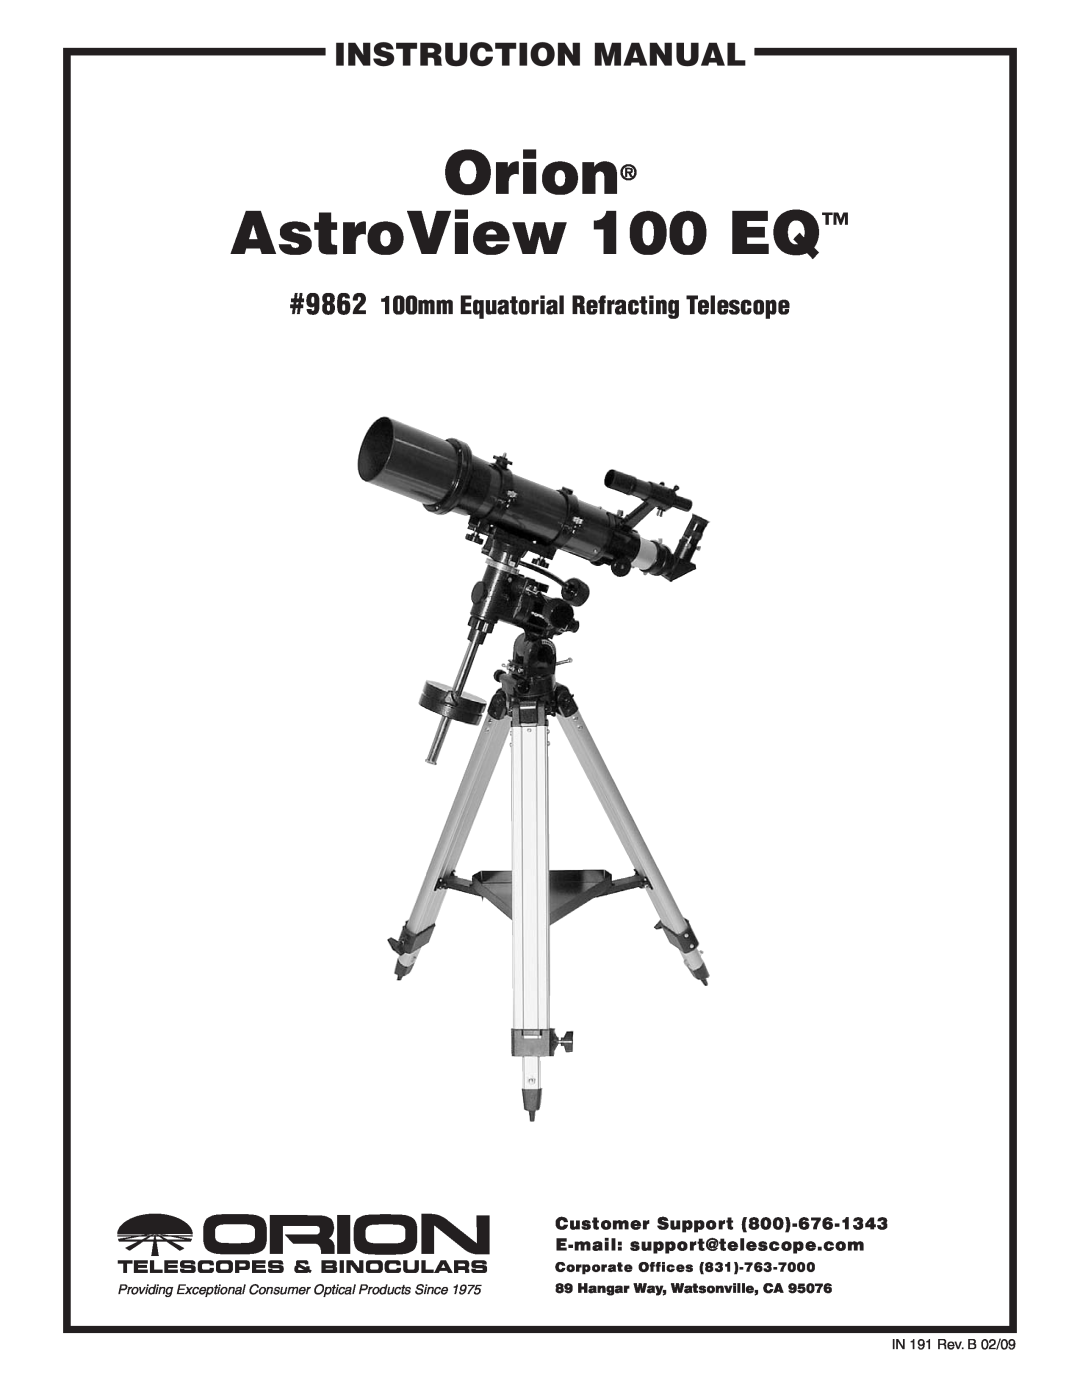 Orion instruction manual #9862100mm Equatorial Refracting Telescope, Orion AstroView 100 EQ 